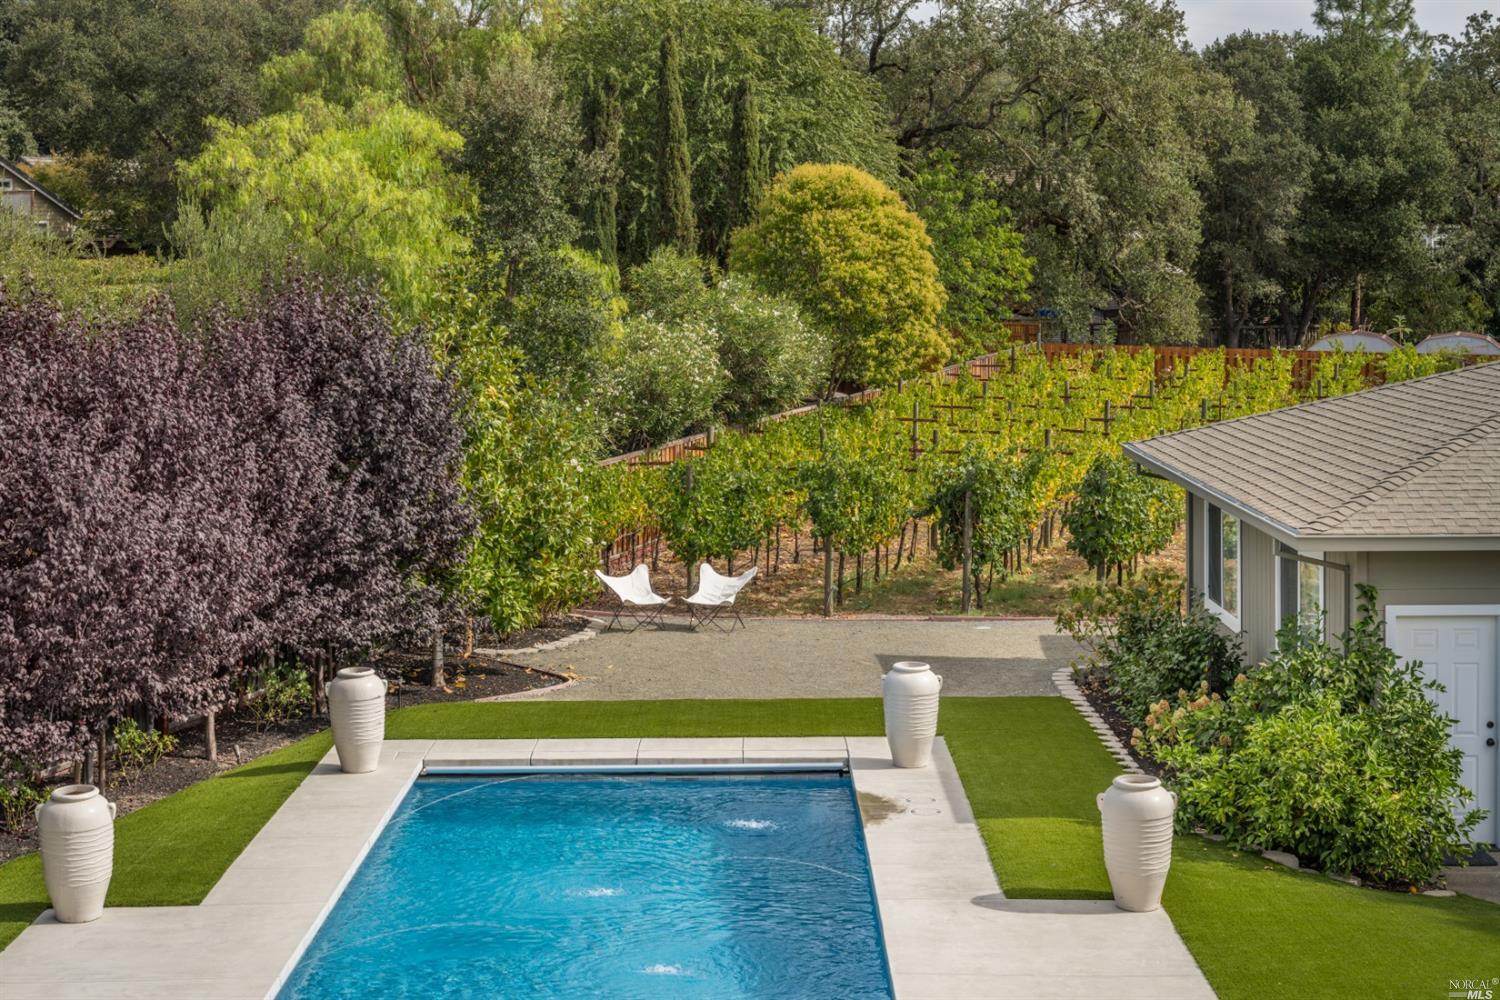 a view of a swimming pool with an outdoor seating and yard